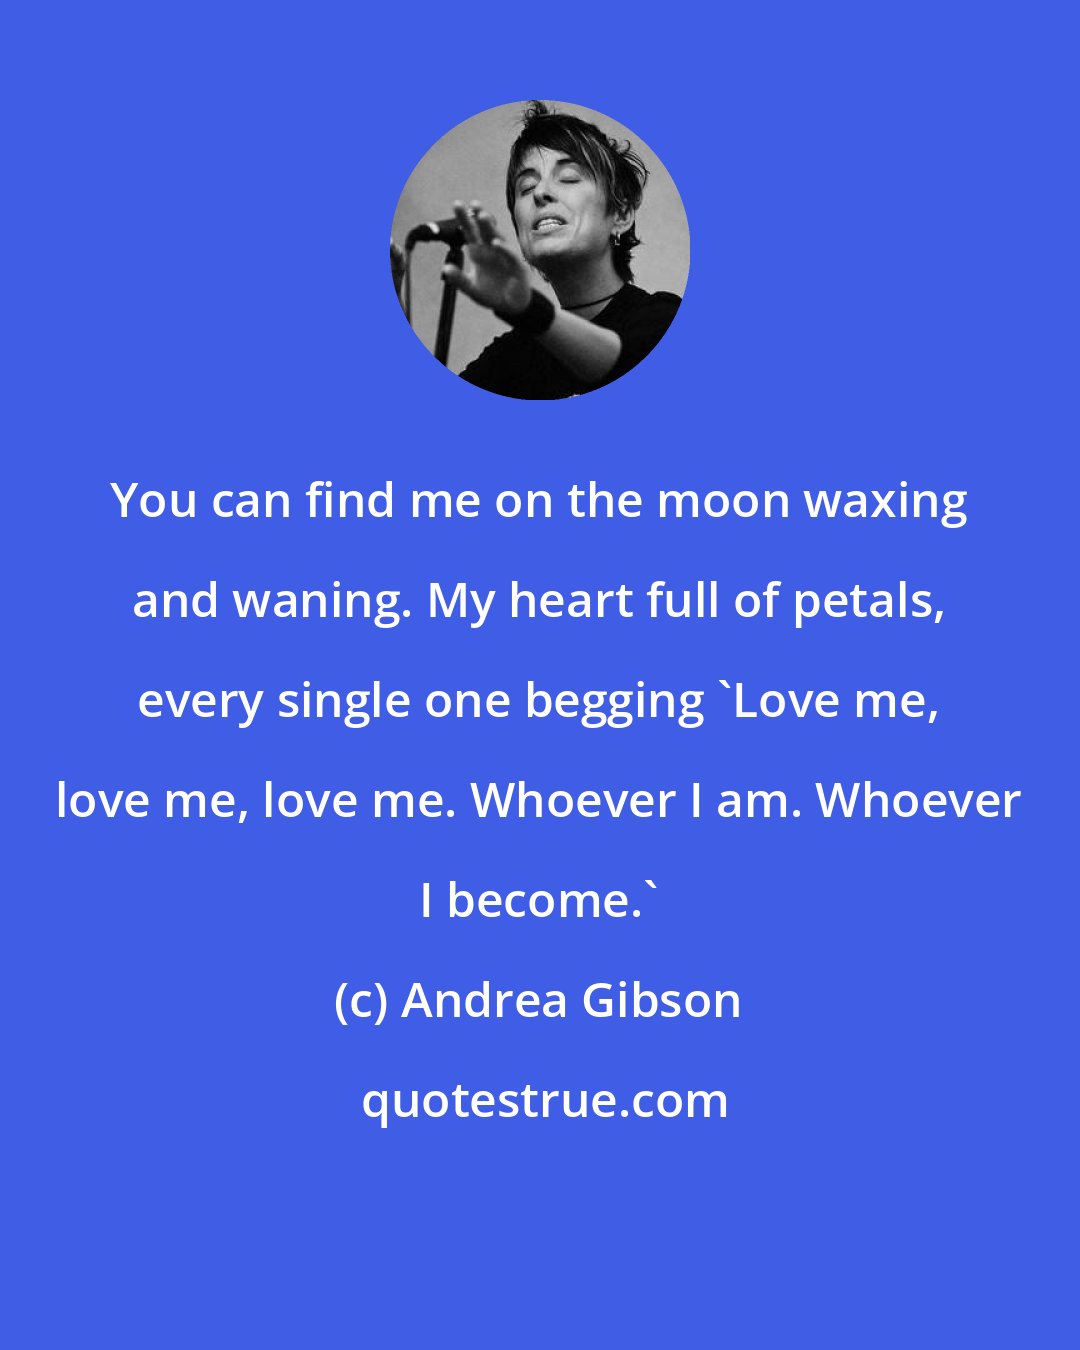 Andrea Gibson: You can find me on the moon waxing and waning. My heart full of petals, every single one begging 'Love me, love me, love me. Whoever I am. Whoever I become.'